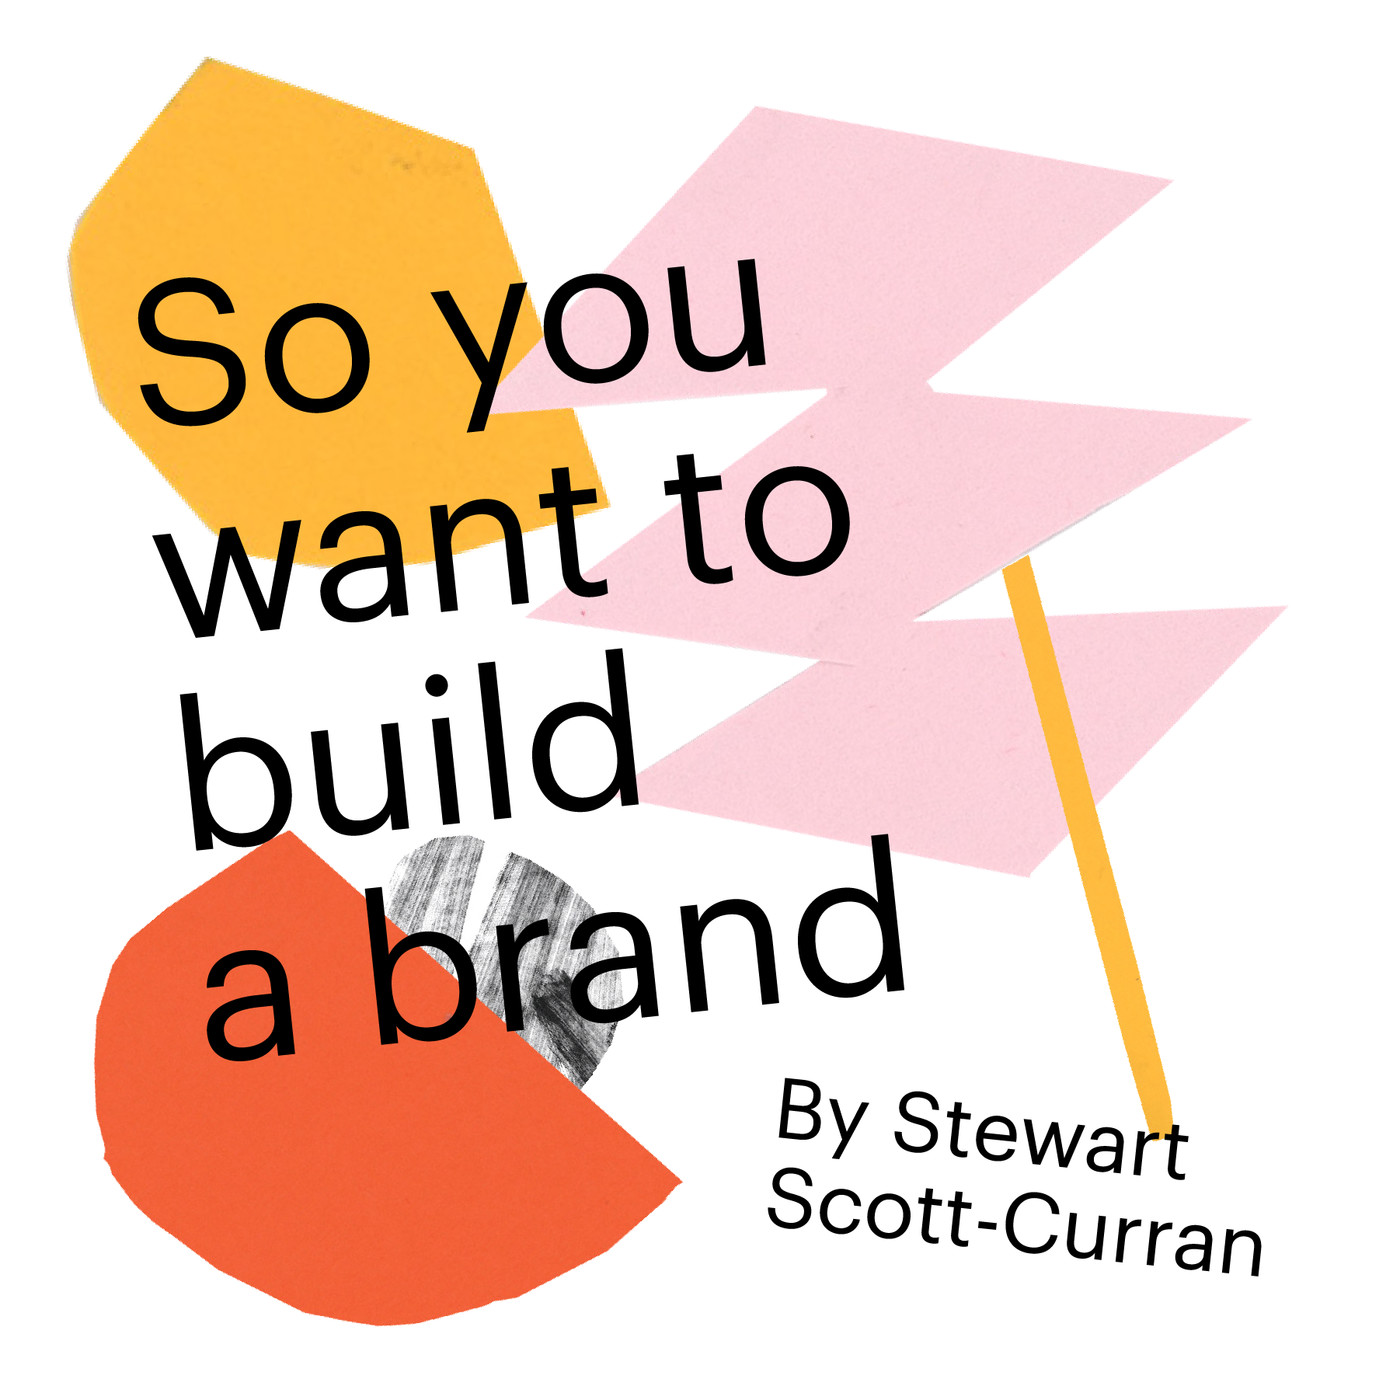 Chapter 11: So you want to build a brand?